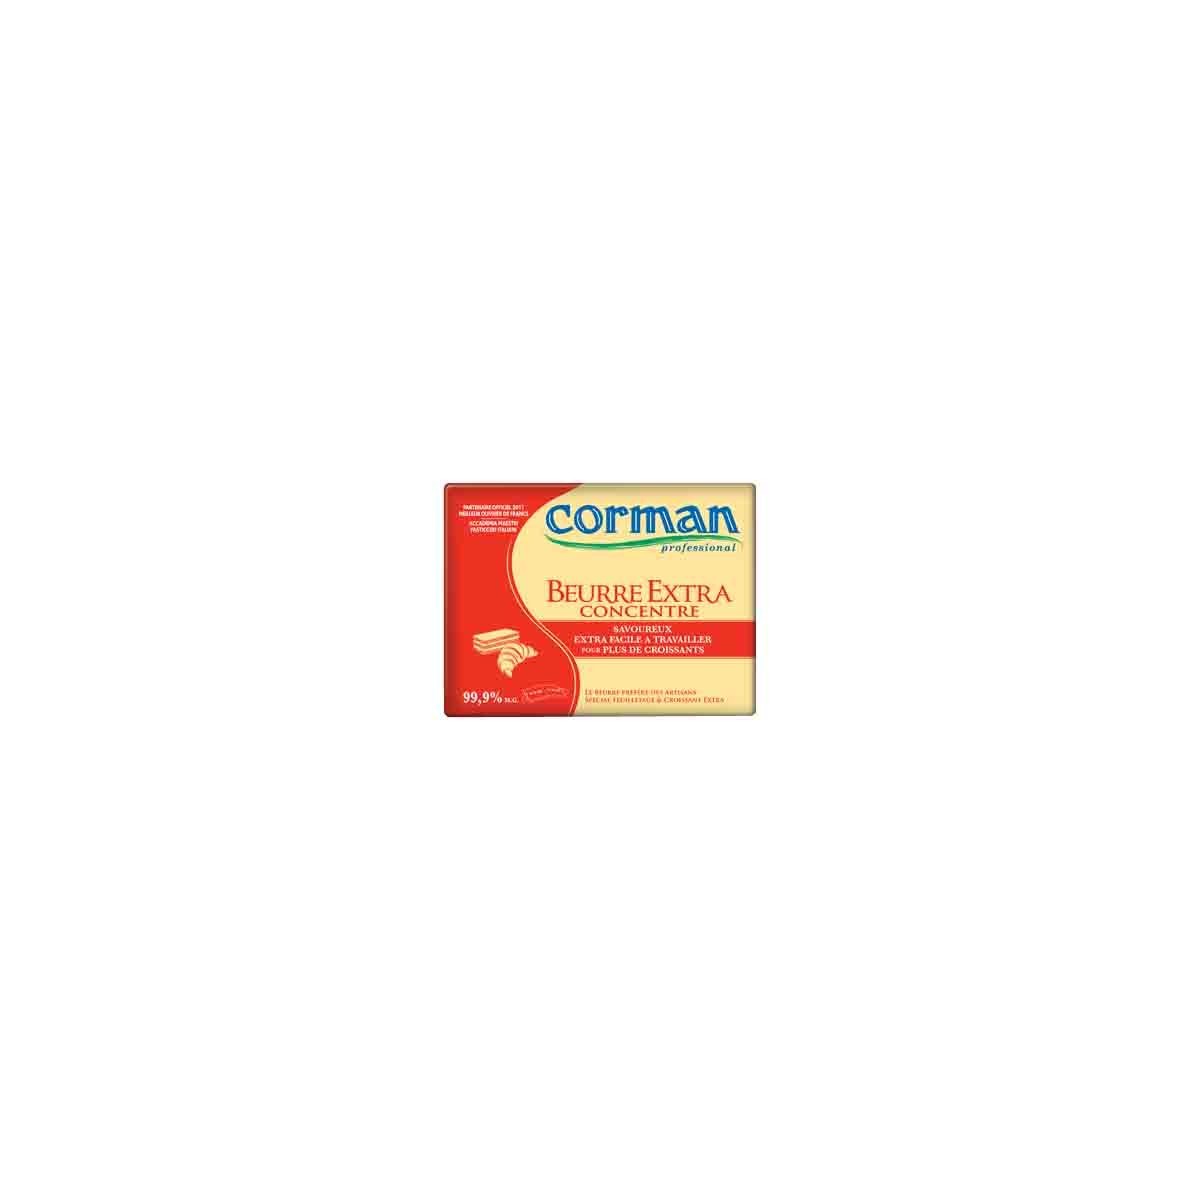 CORMAN BUTTER EXTRA 99% CONCENTRATED PUFF PASTRY & CROISSANT 5 X 2 KG 0029968 - 29778201  KG